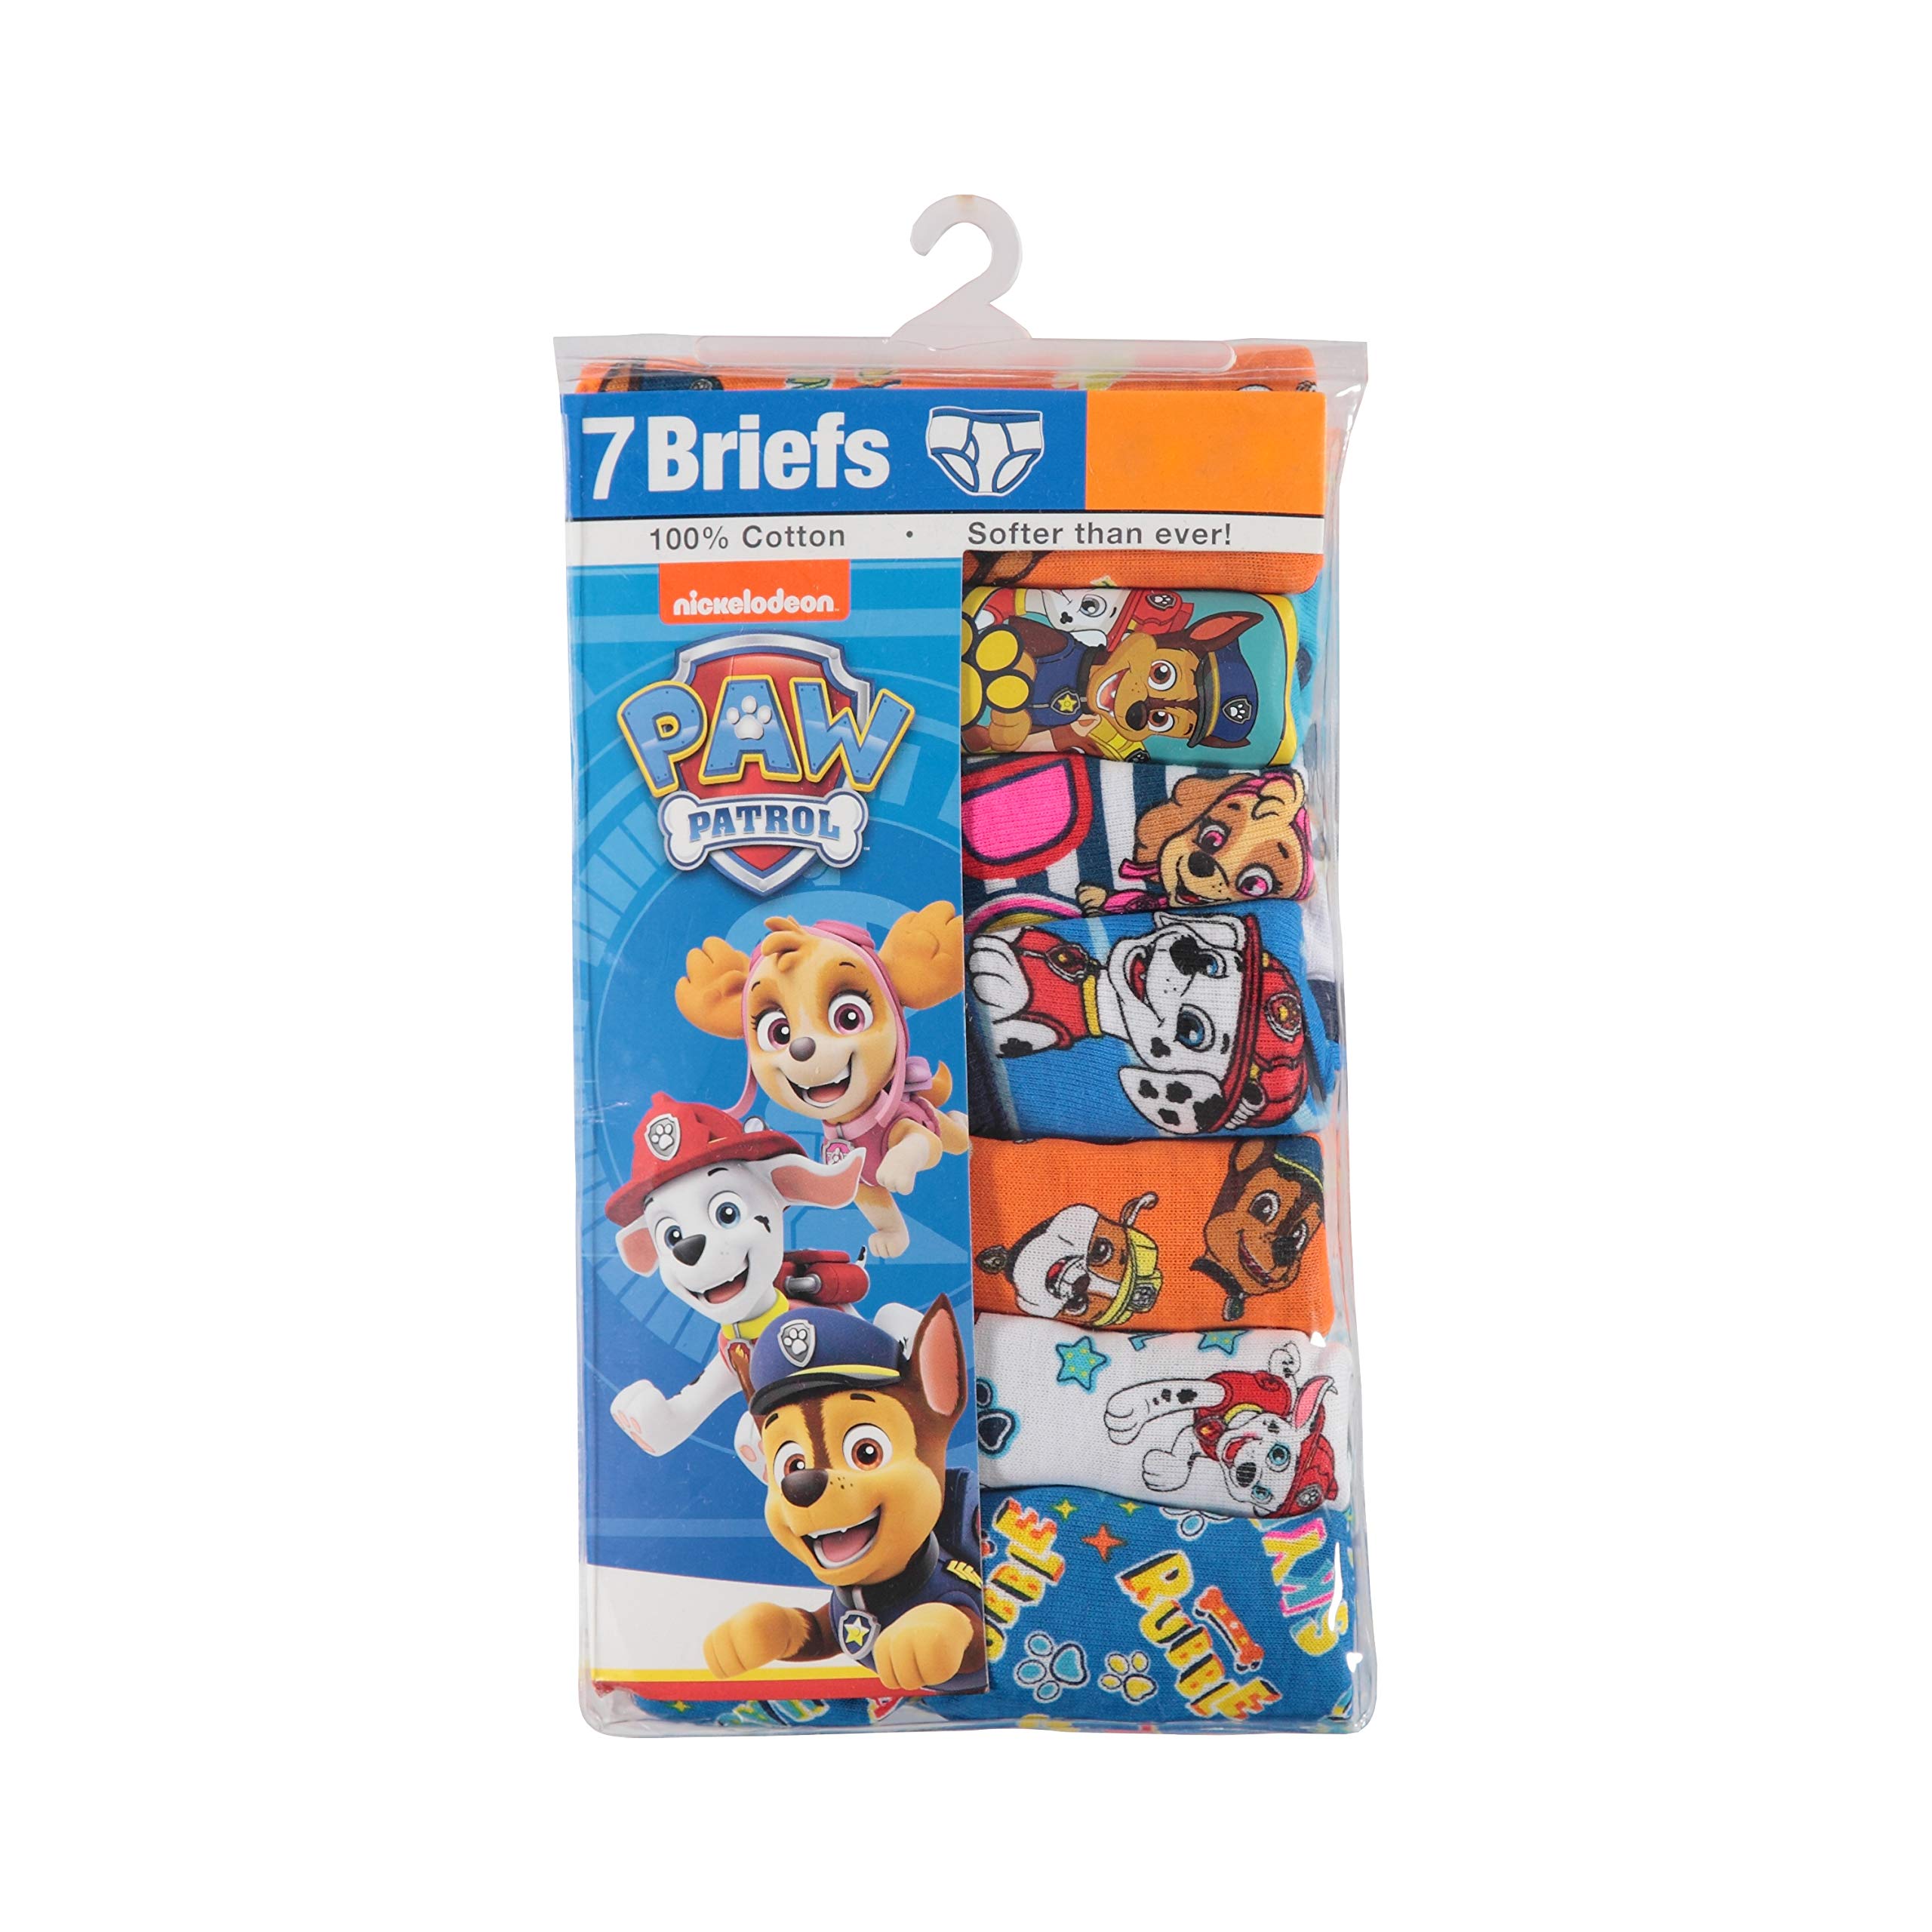 Paw Patrol Boys' 100% Combed Cotton Underwear 5-10packs Available with Chase, Skye, Rubble and More in Sizes 18m, 2/3t, 4t